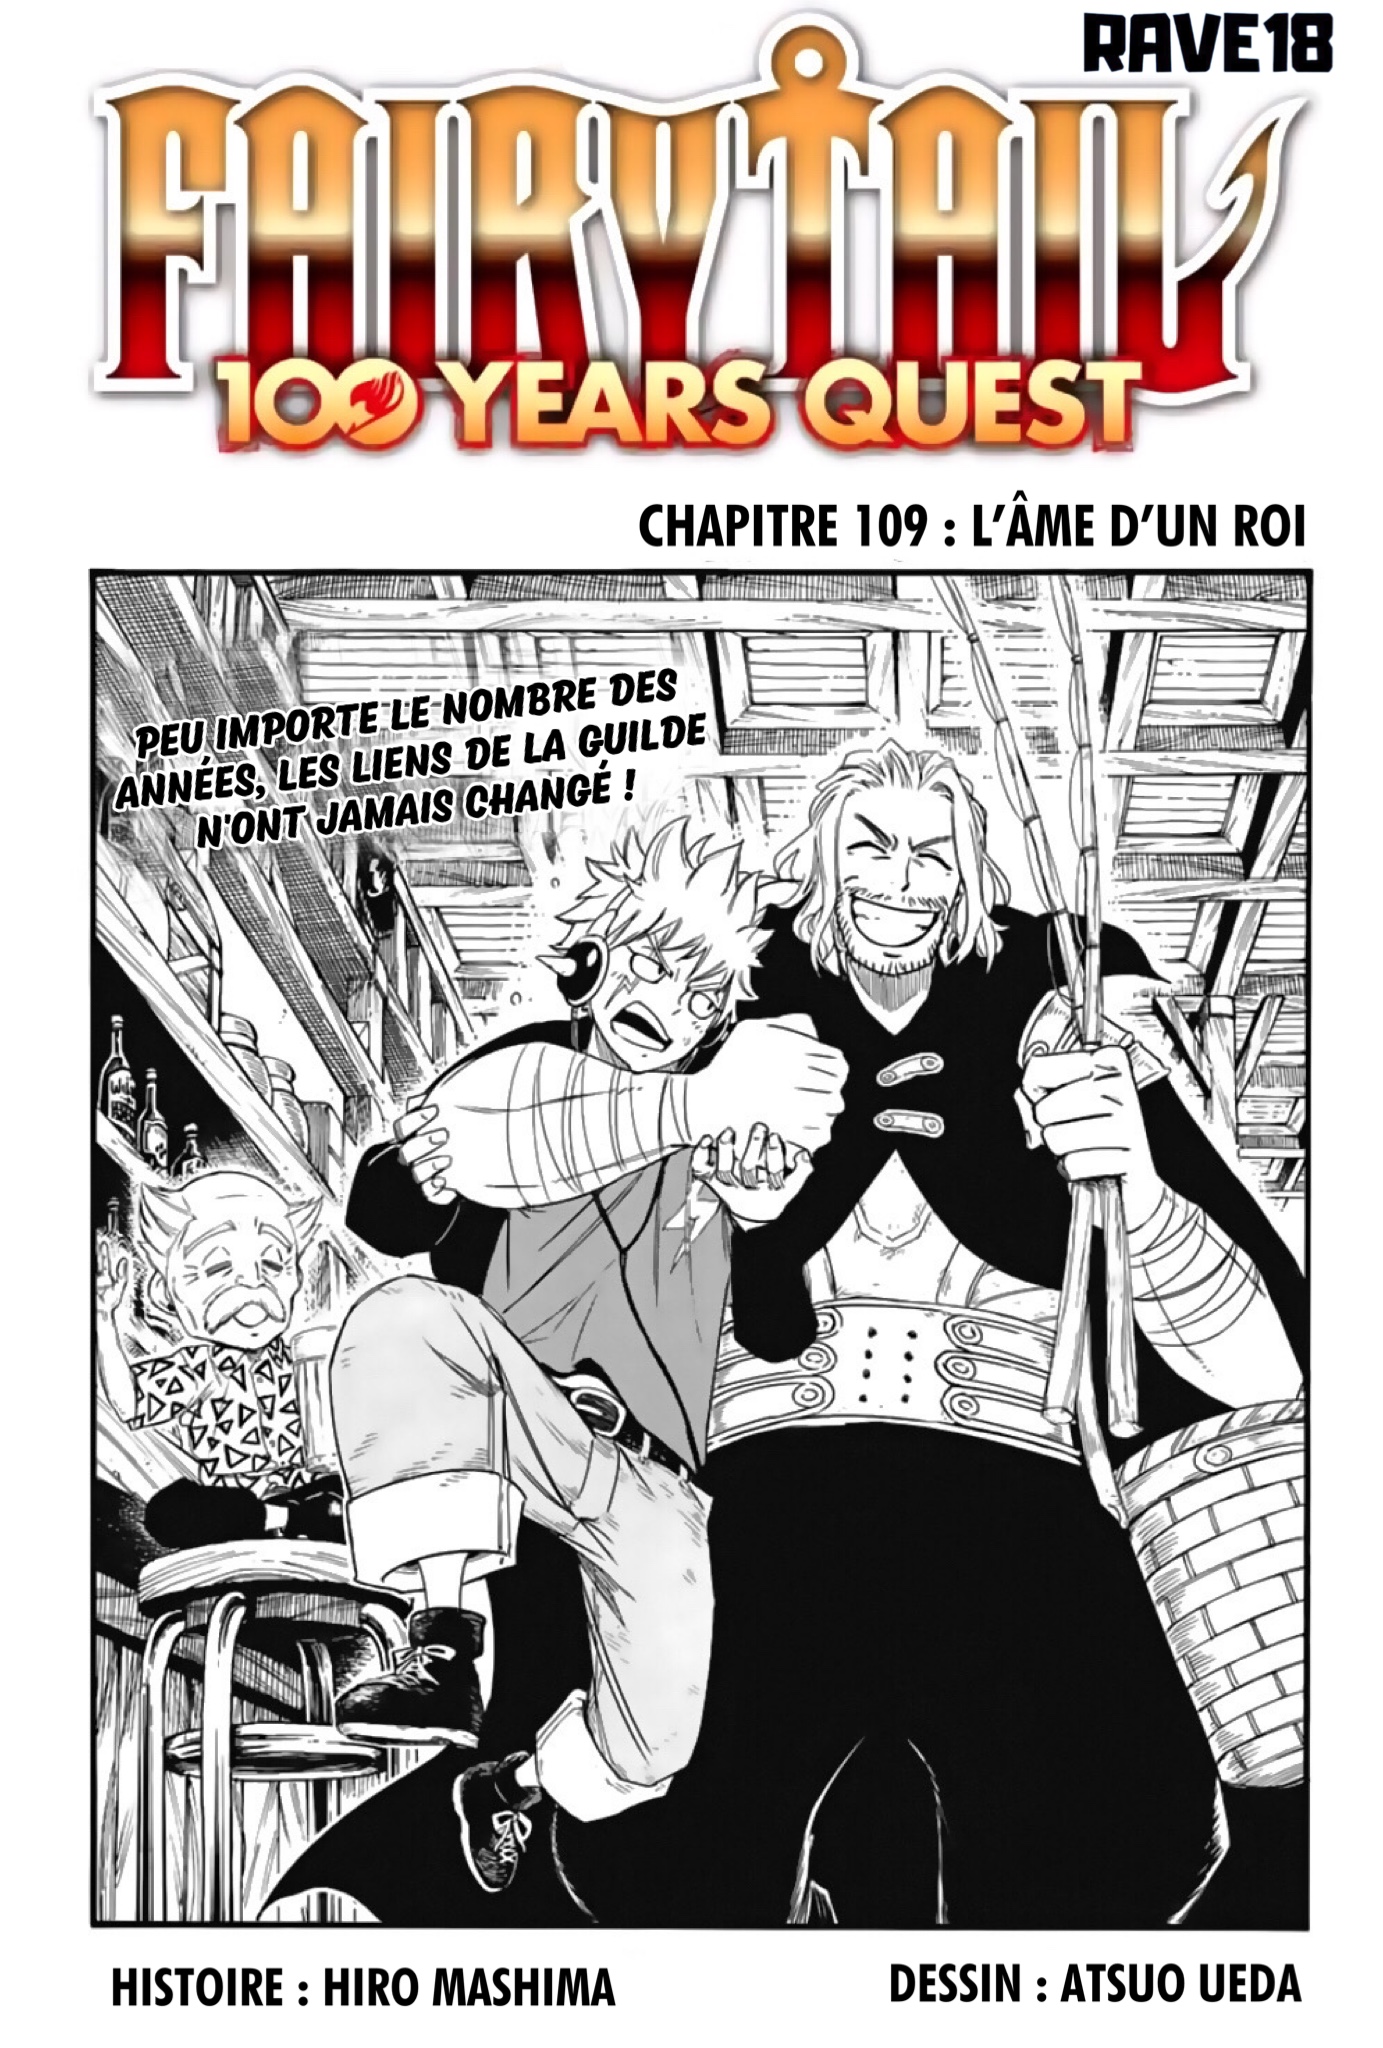 Fairy Tail 100 Years Quest: Chapter chapitre-109 - Page 1